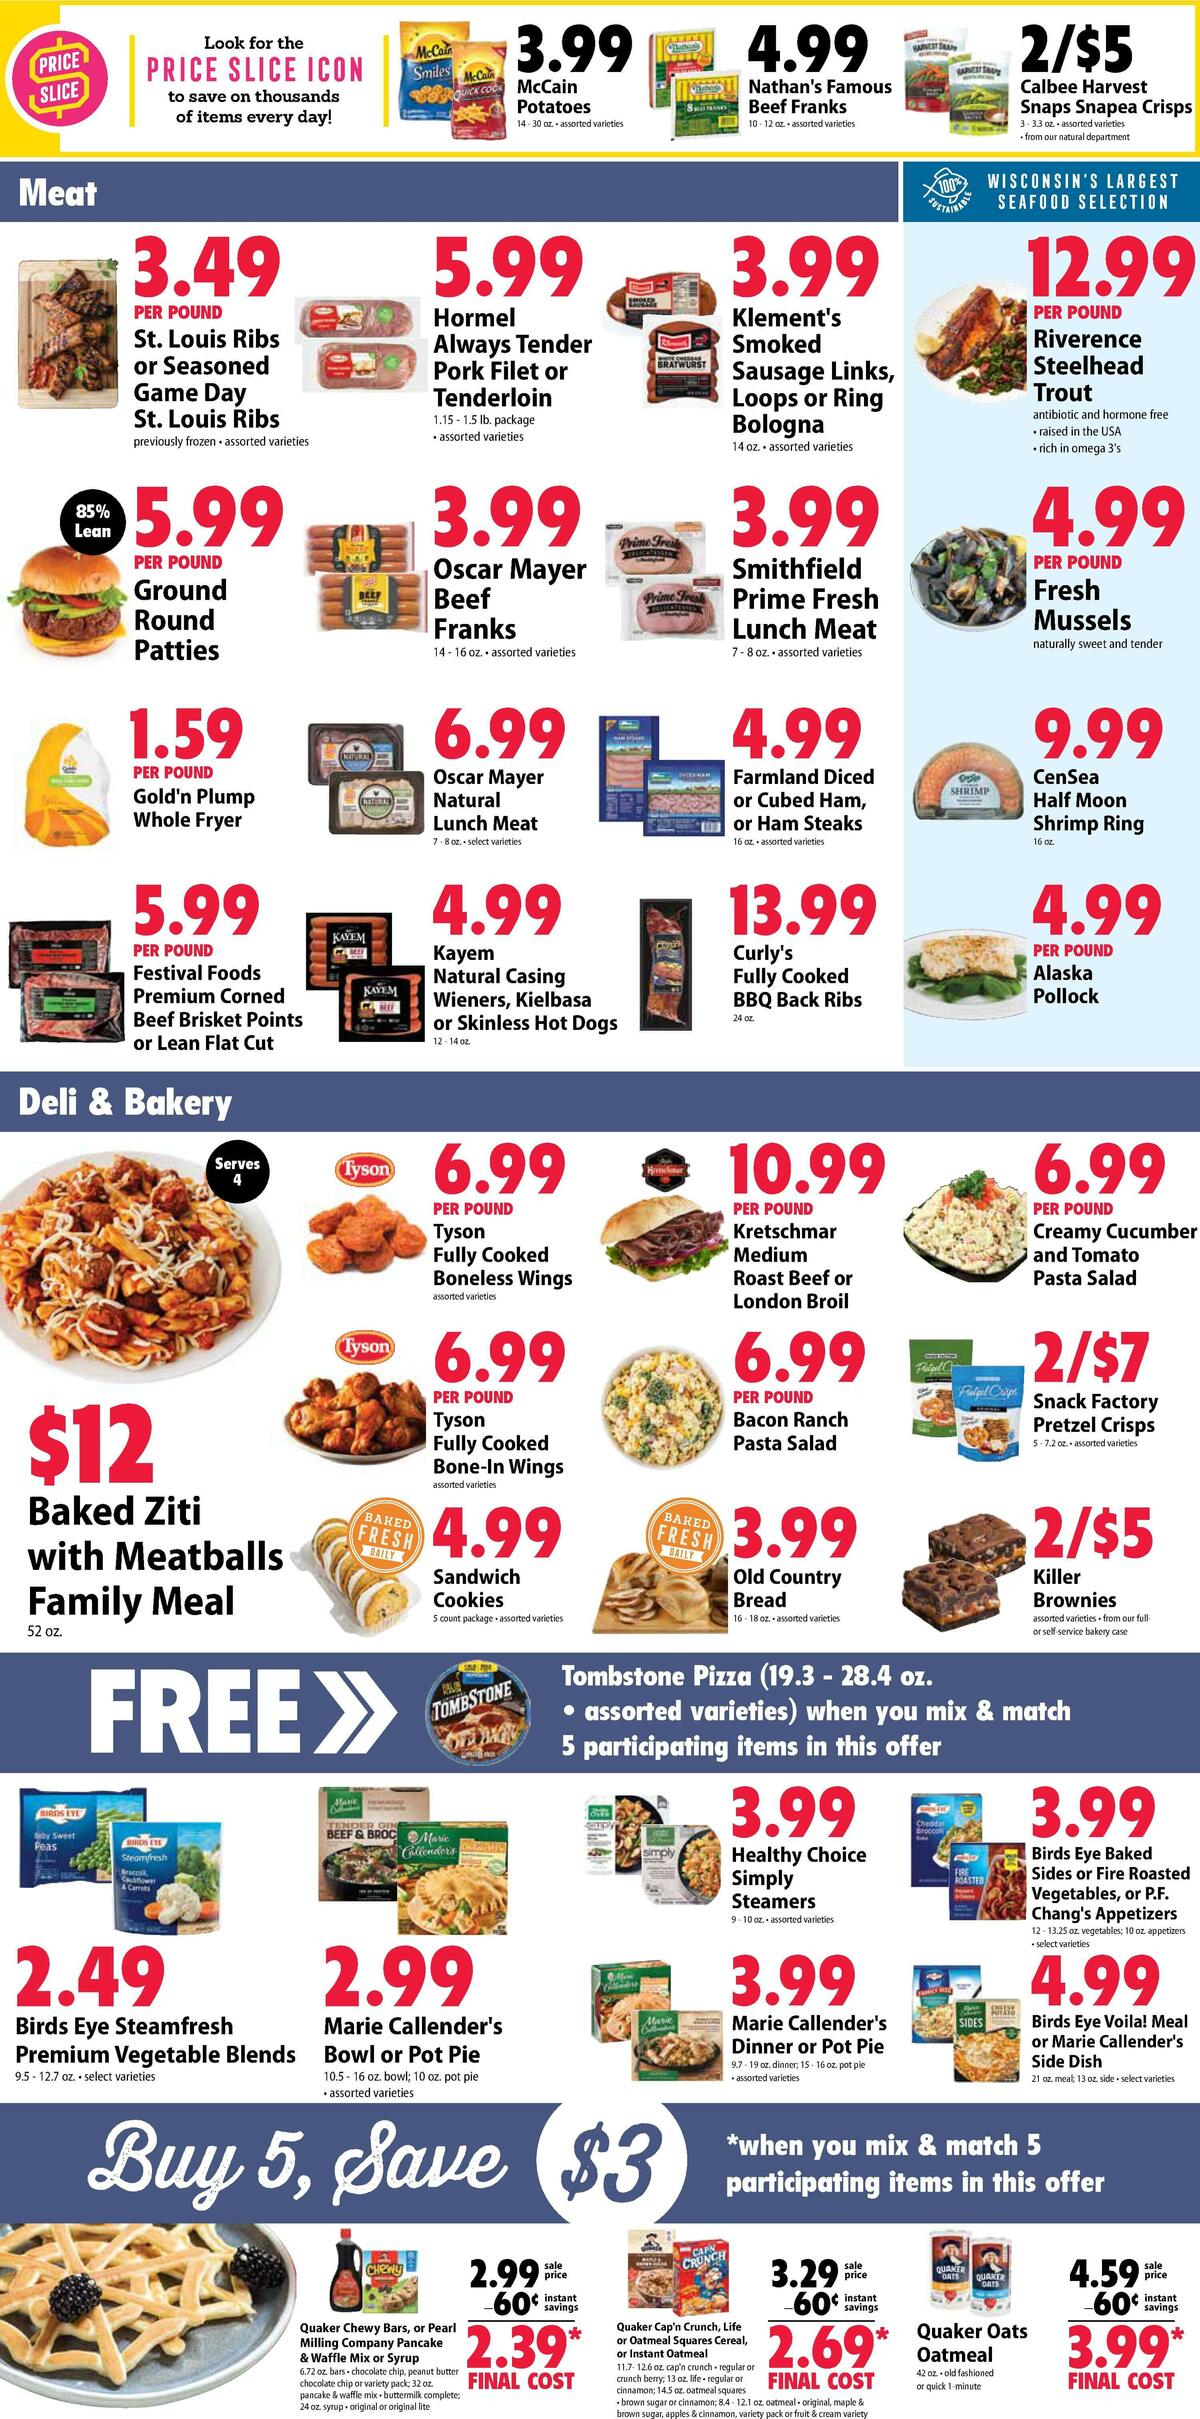 Festival Foods Weekly Ad from October 25